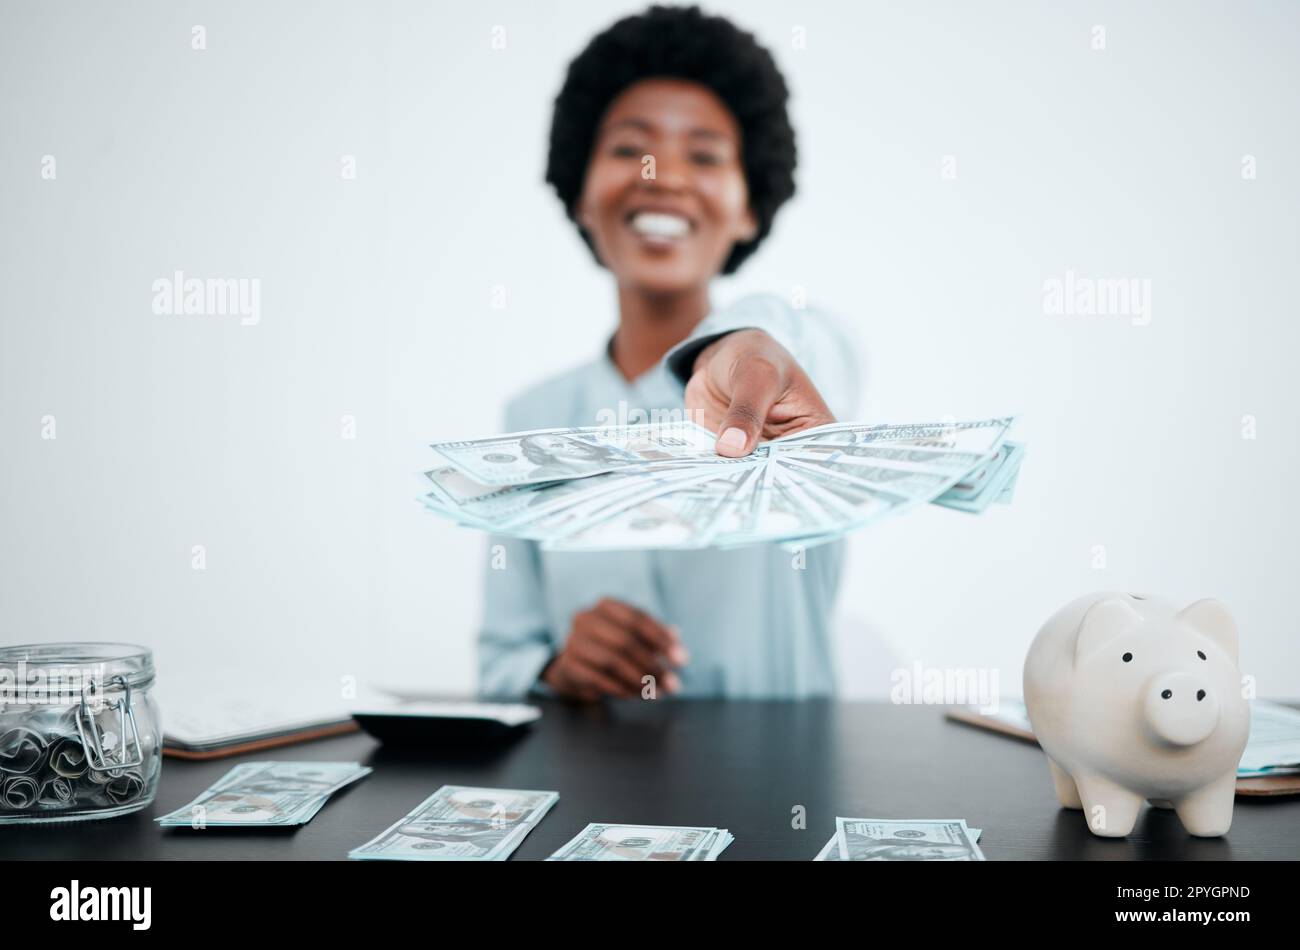 Hand, dollars and black woman with money for payment, financial investment or bribe in office. Portrait, finance or business woman offering cash for banking, deal or savings, loan or money laundering Stock Photo